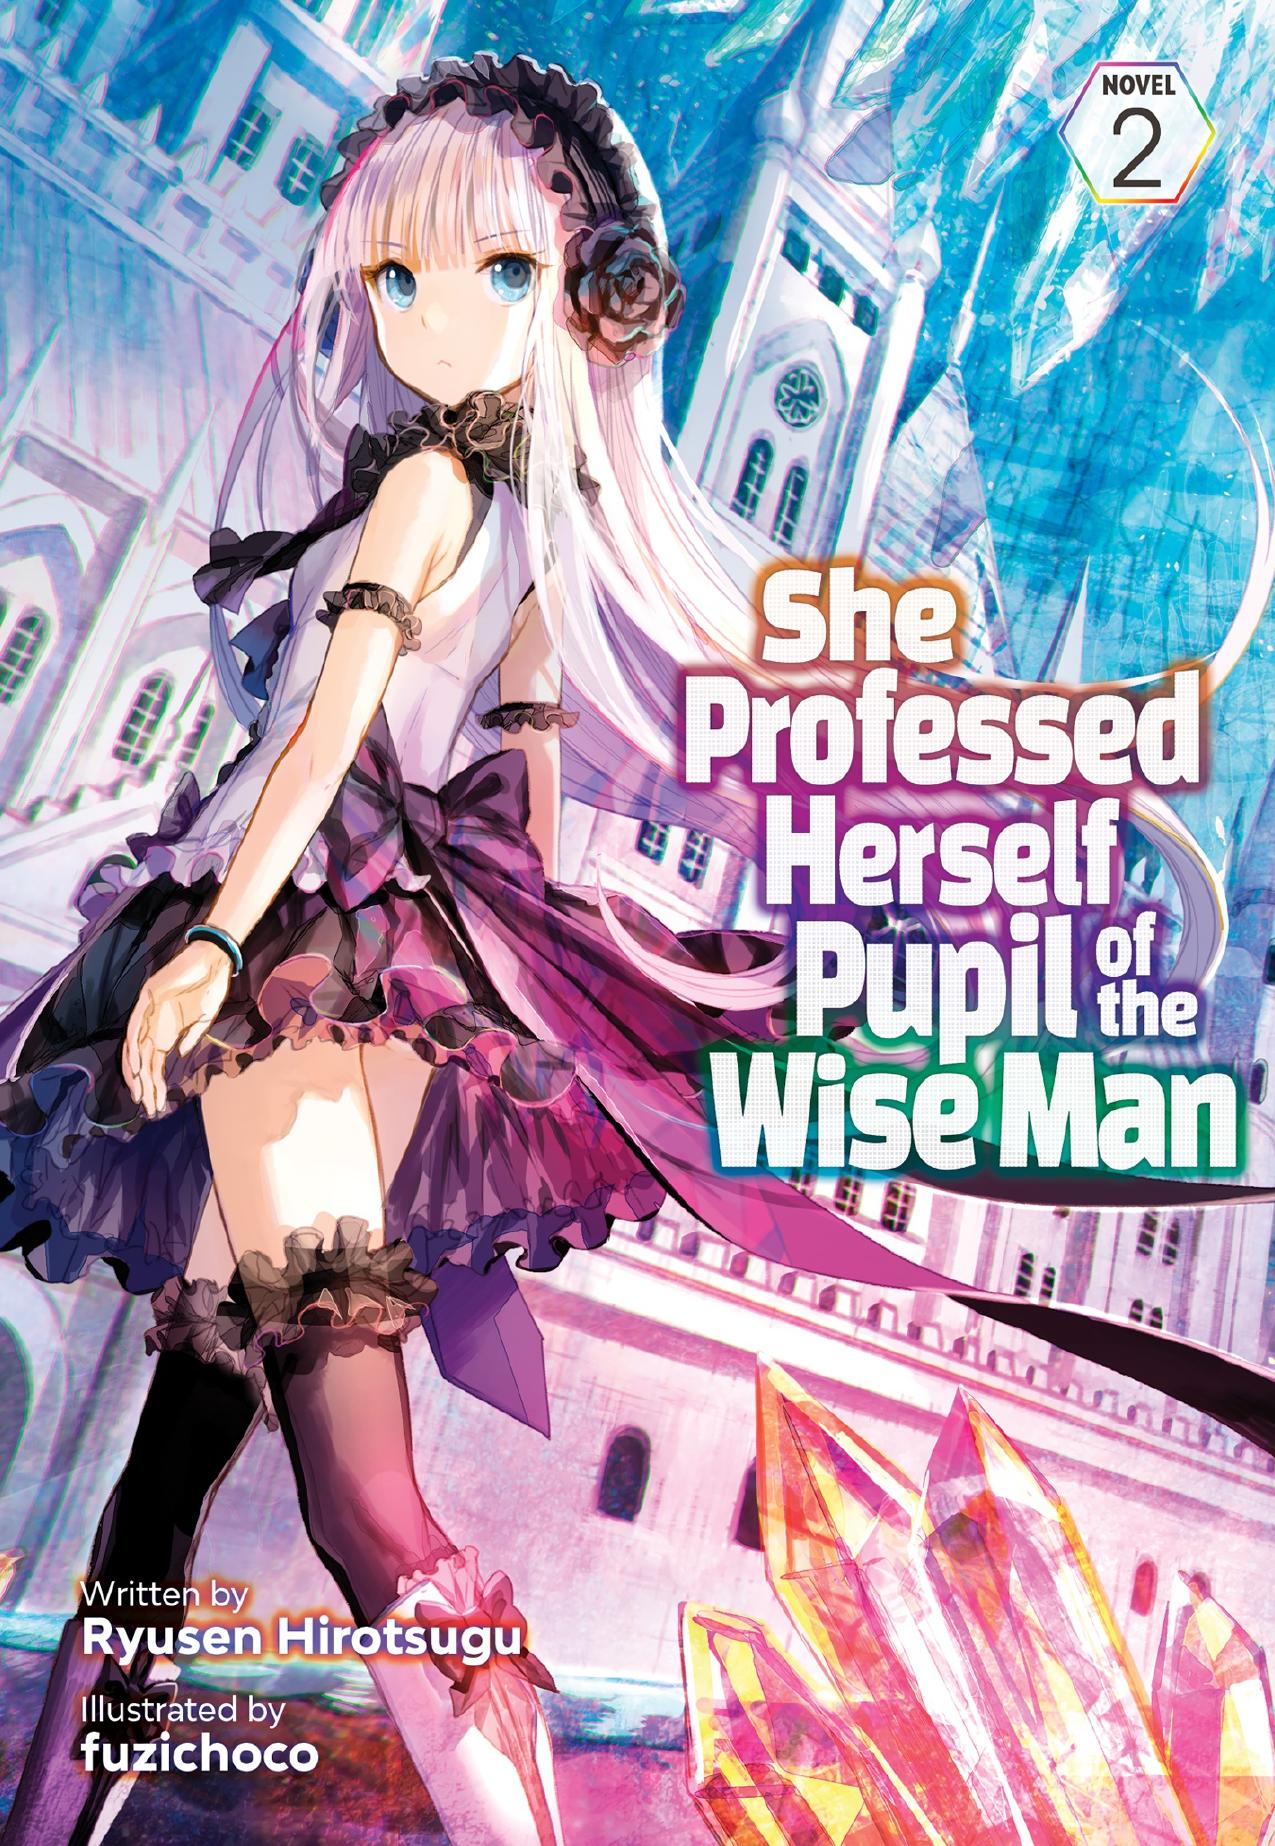 She Professed Herself Pupil of the Wise Man Vol. 2 by Ryusen Hirotsugu